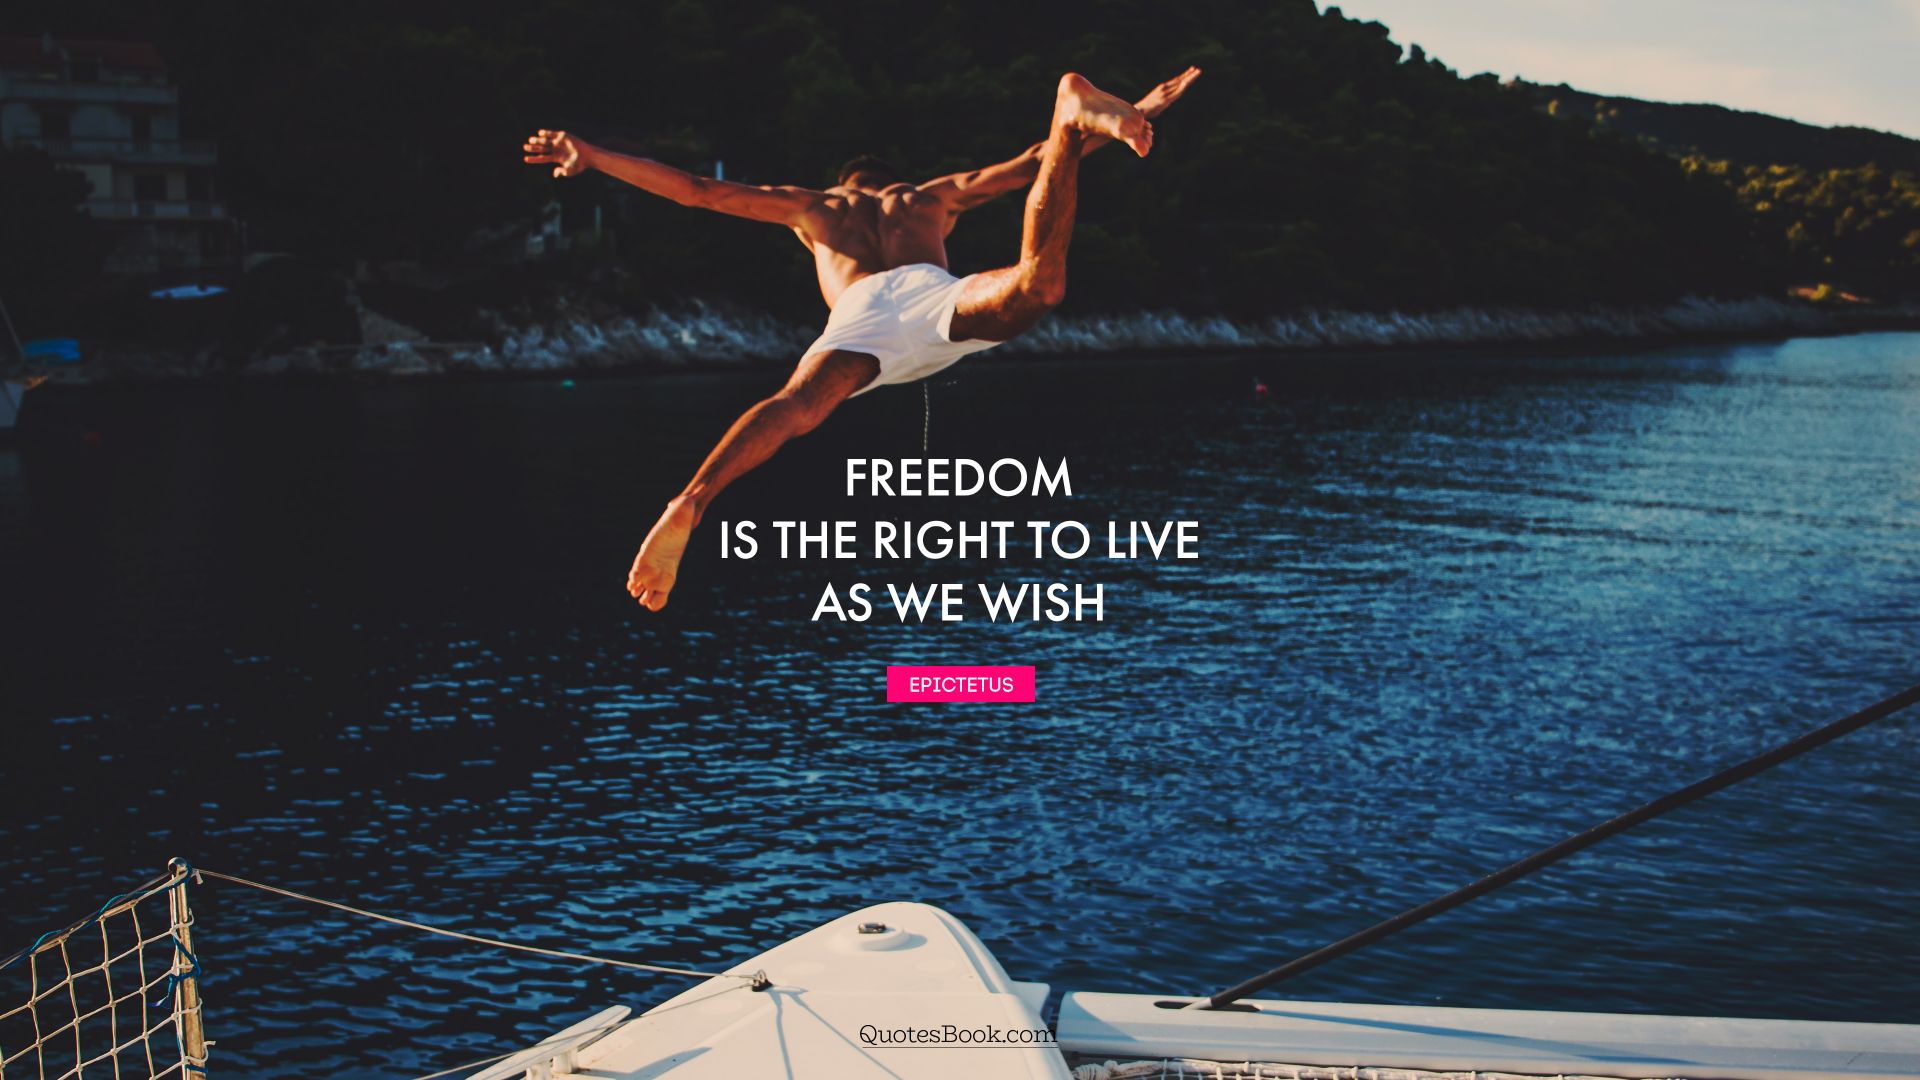 Freedom is the right to live as we wish. - Quote by Epictetus